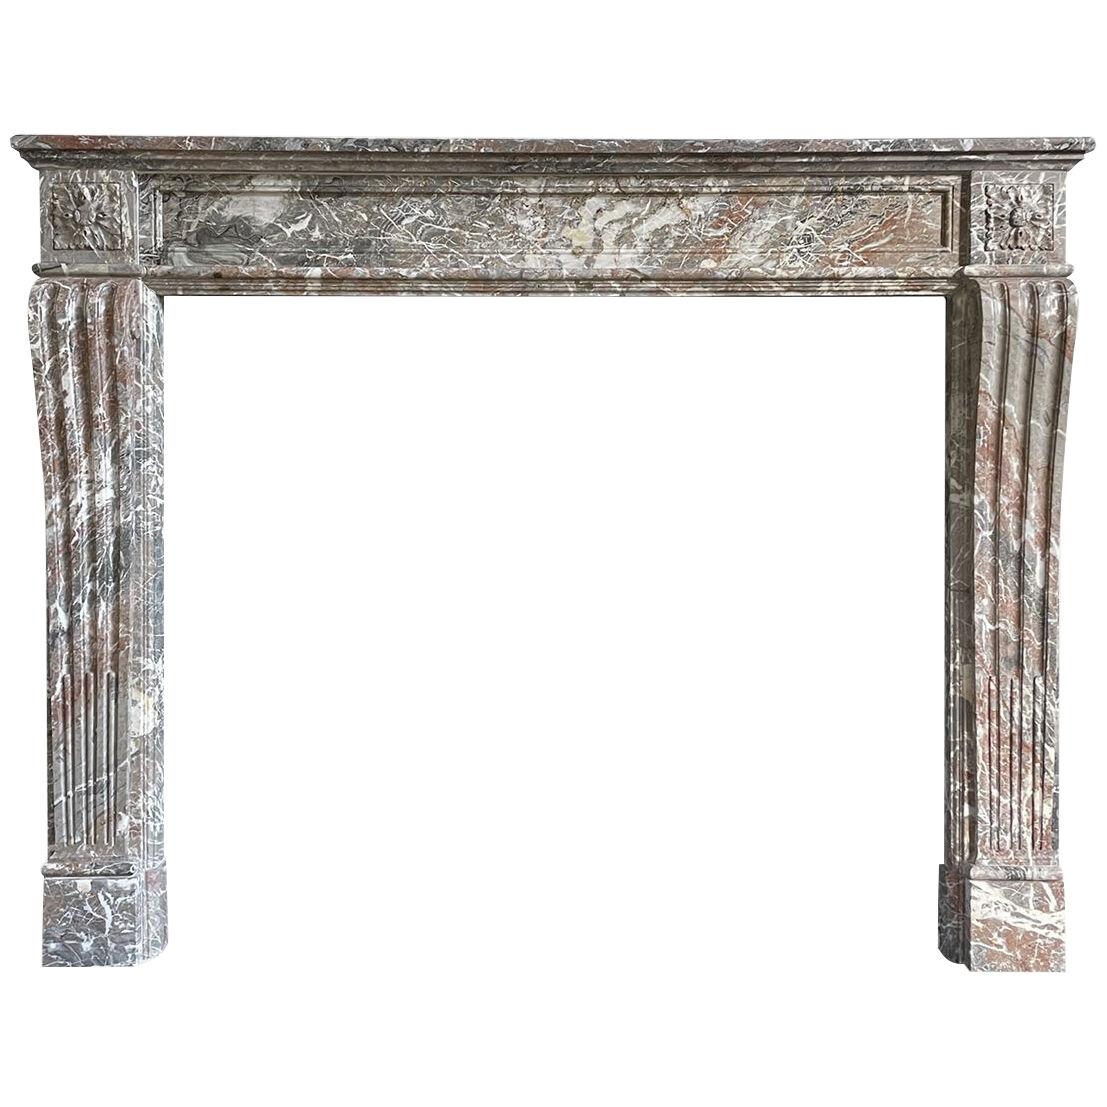 An Antique French Marble Louis XVI Style Fireplace Mantel